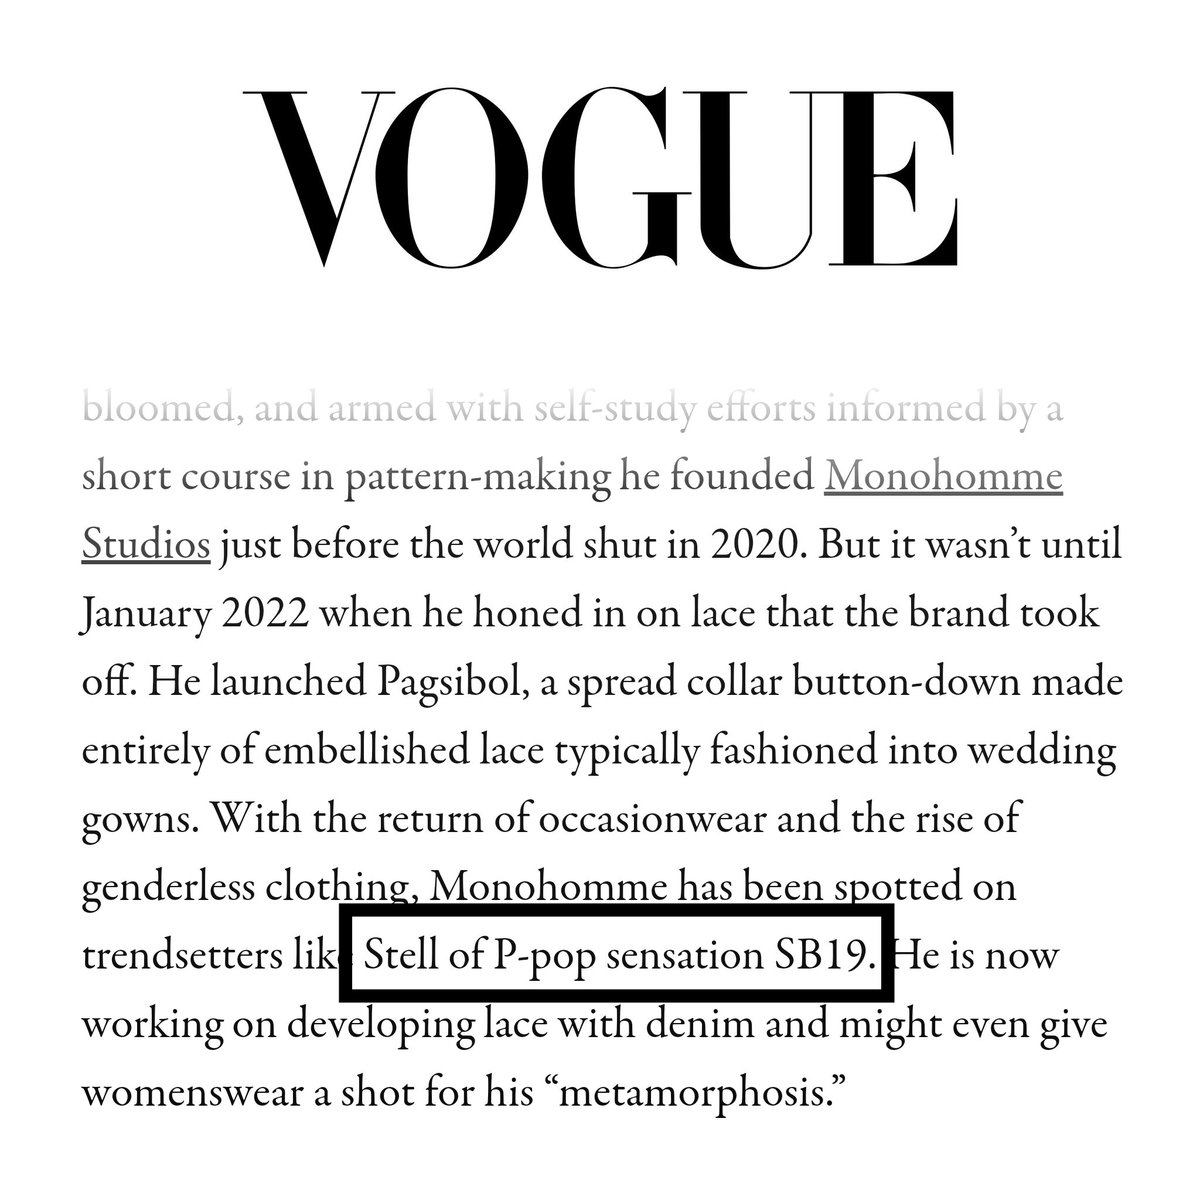 [Vogue Philippines - SB19 Stell mention]

⚠️ vogue.ph/magazine/roots…

- 'With the return of occasionwear and the rise of genderless clothing, Monohomme has been spotted on trendsetters like Stell of P-pop sensation SB19.'

WHO IS SB19
@stellajero_ #SB19_STELL
@SB19Official #SB19